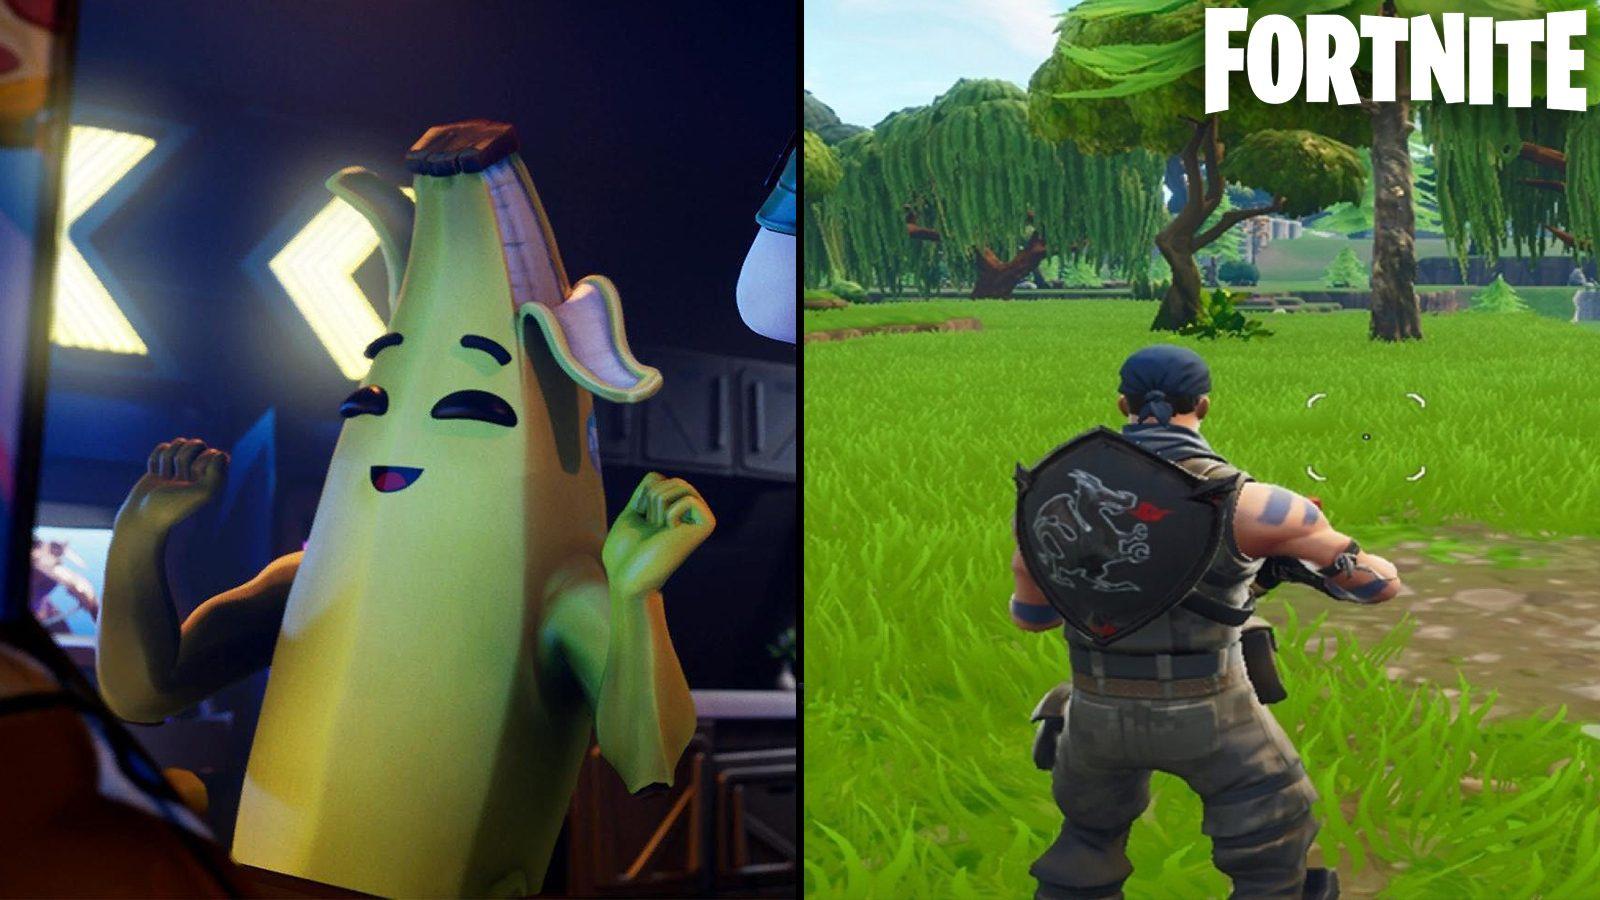 Fortnite Fans Are Strongly Requesting Epic Games to Keep the OG